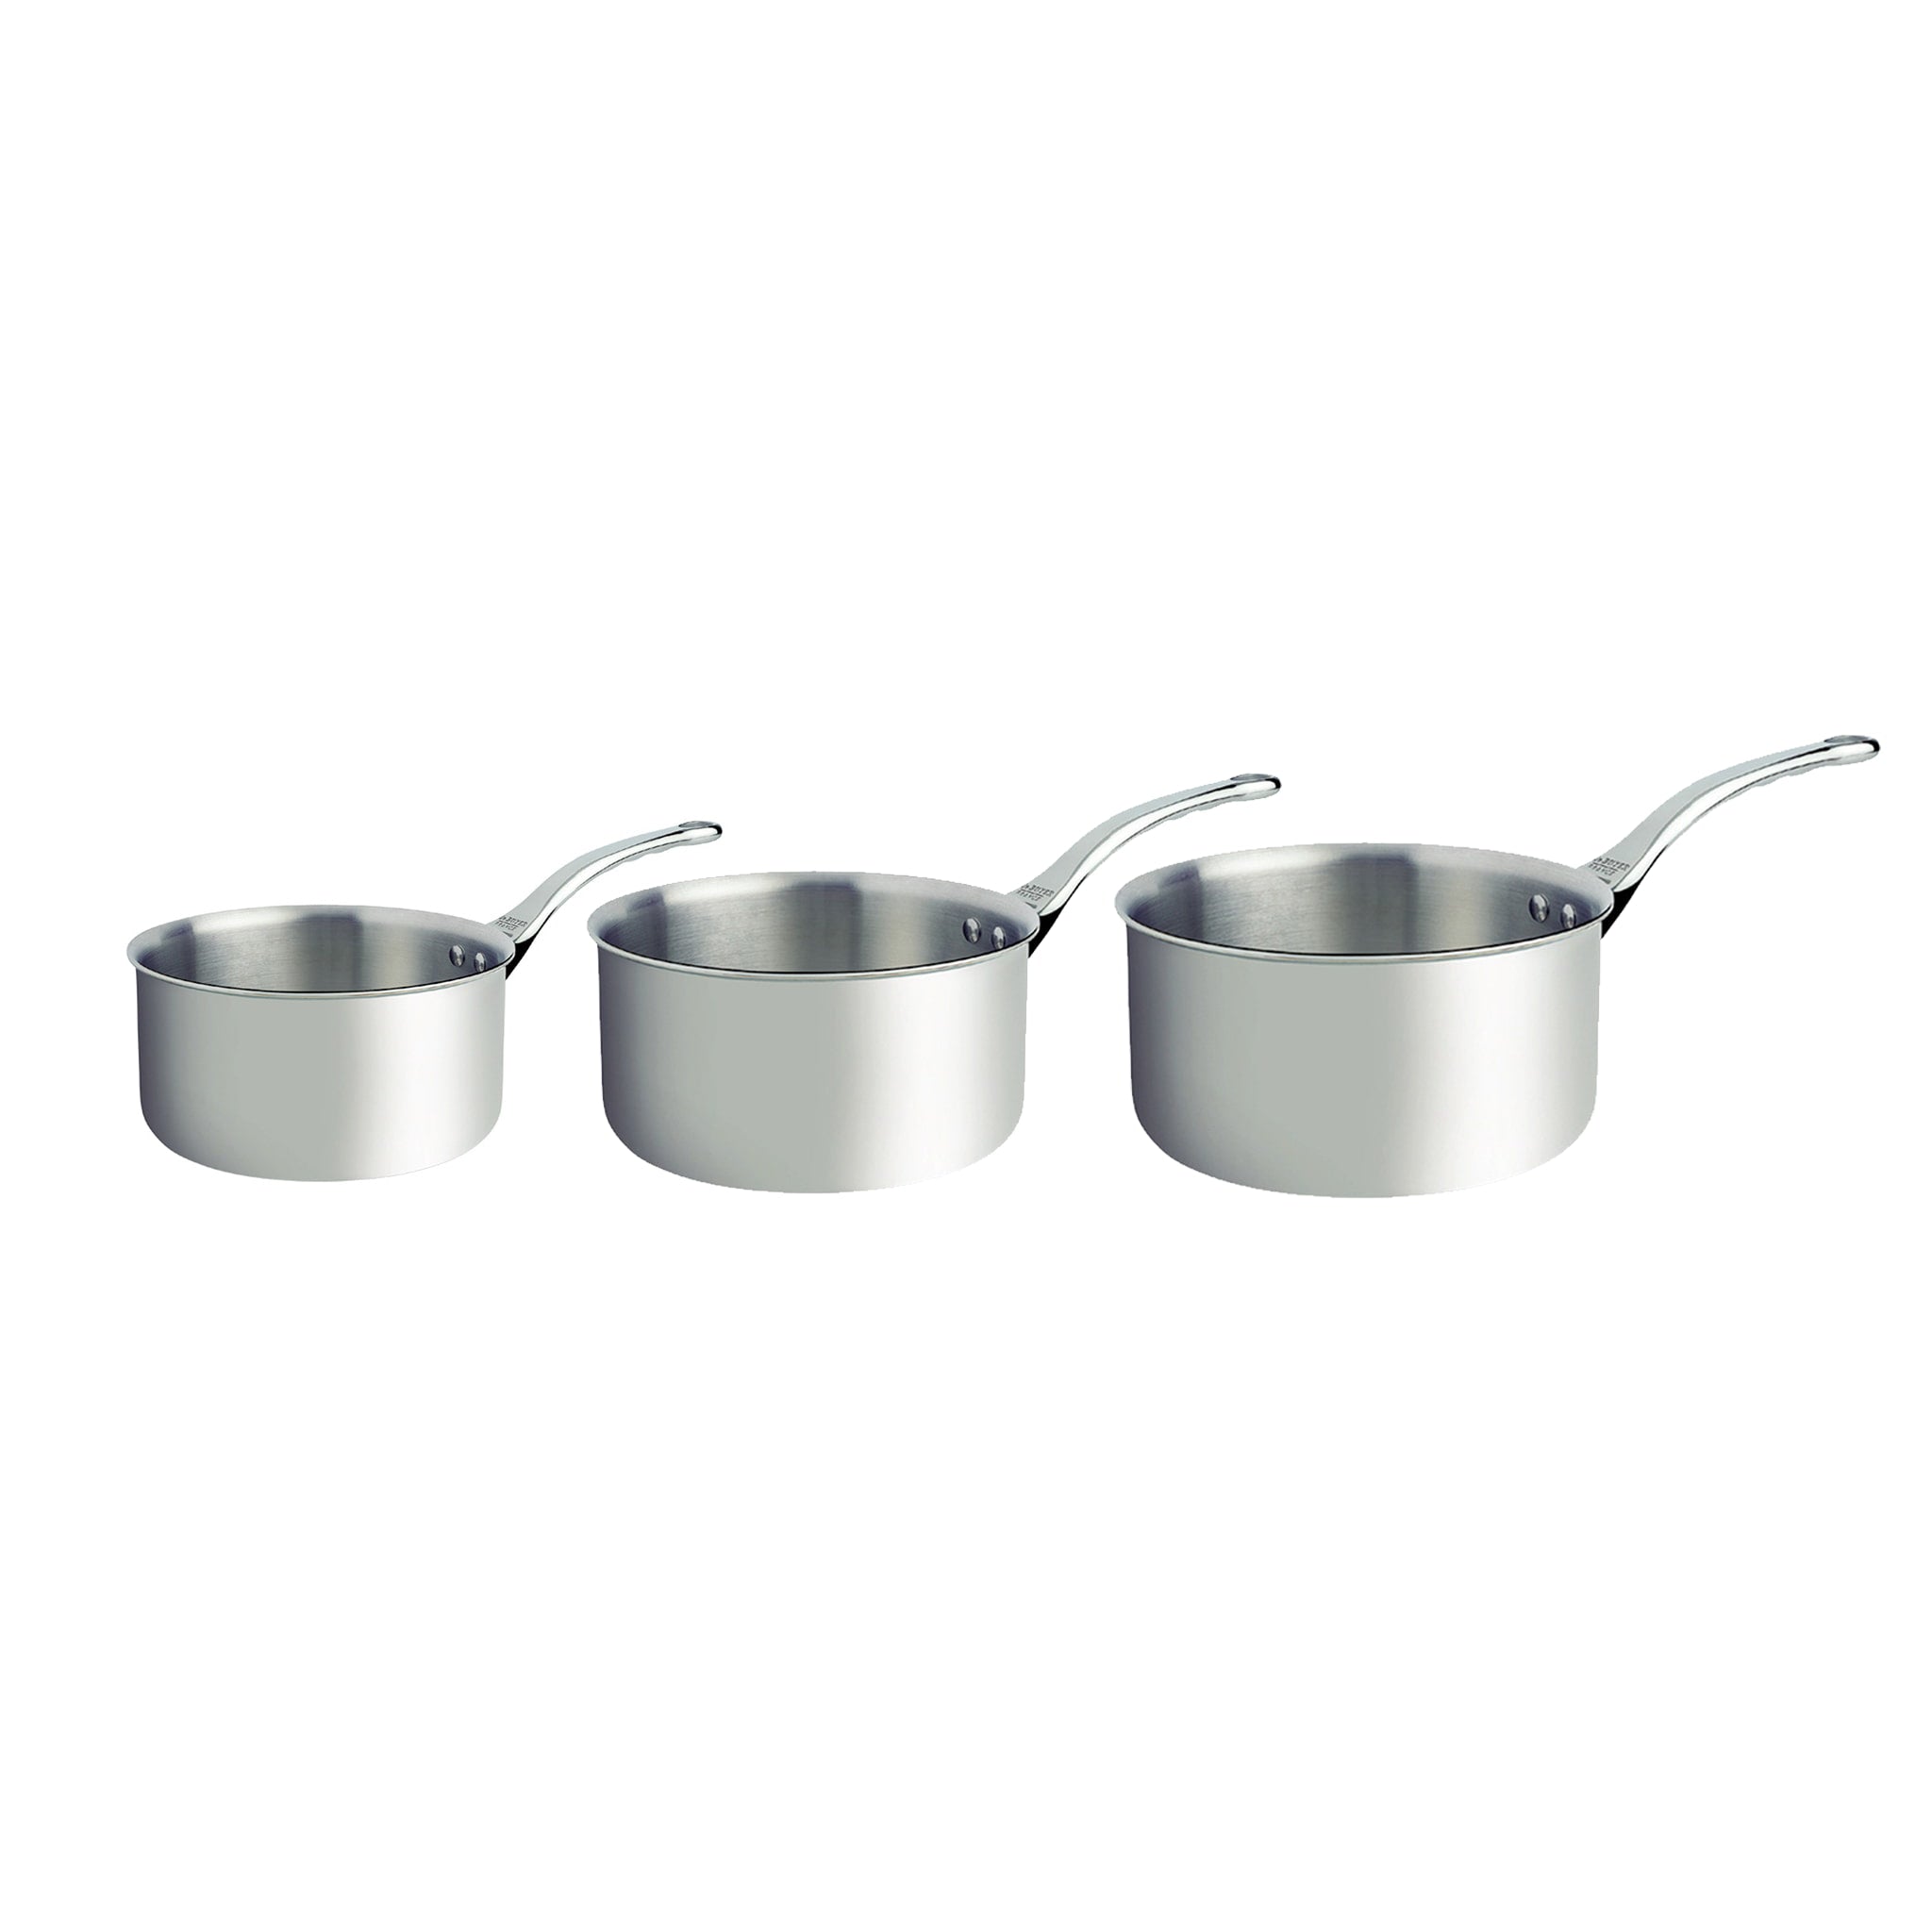 de Buyer - Stainless Steel Cookware Set of 4 - AFFINITY